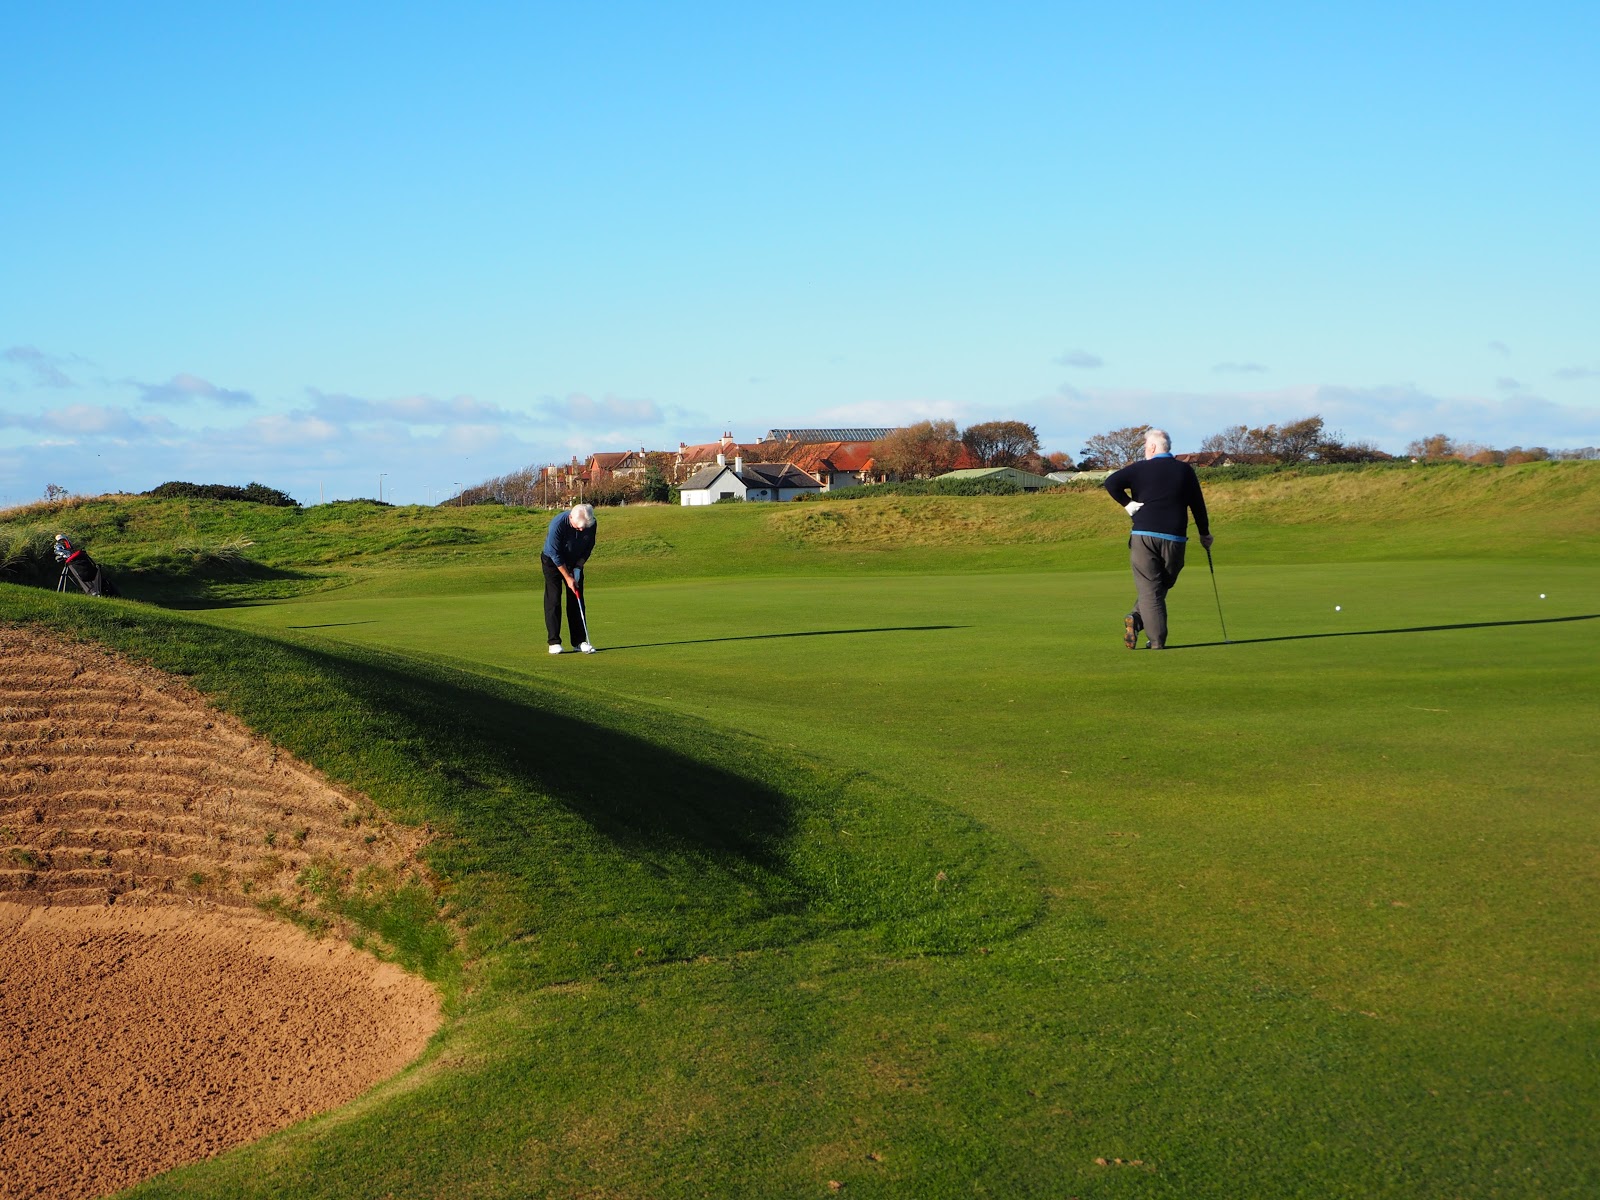 Scottish golf courses - all of them: Royal Troon GC - Old Course ...